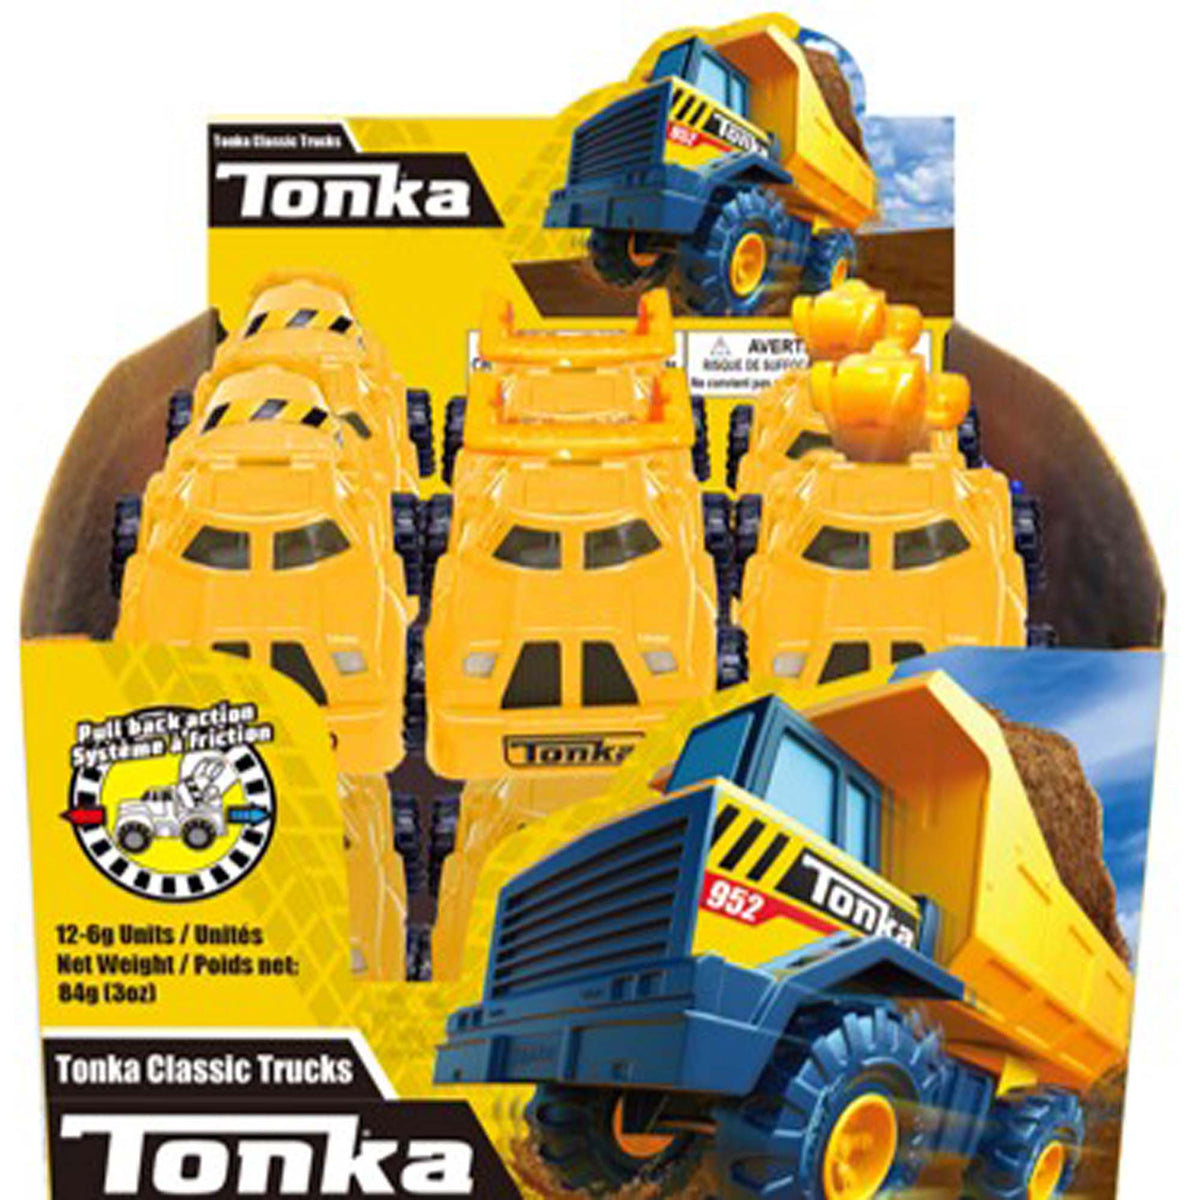 EXCLUSIVE CANDY & NOVELTY DISTRIBUTING LTD impulse buying Tonka Mighty Truck with Candy, 6g, Assortment, 1 Count